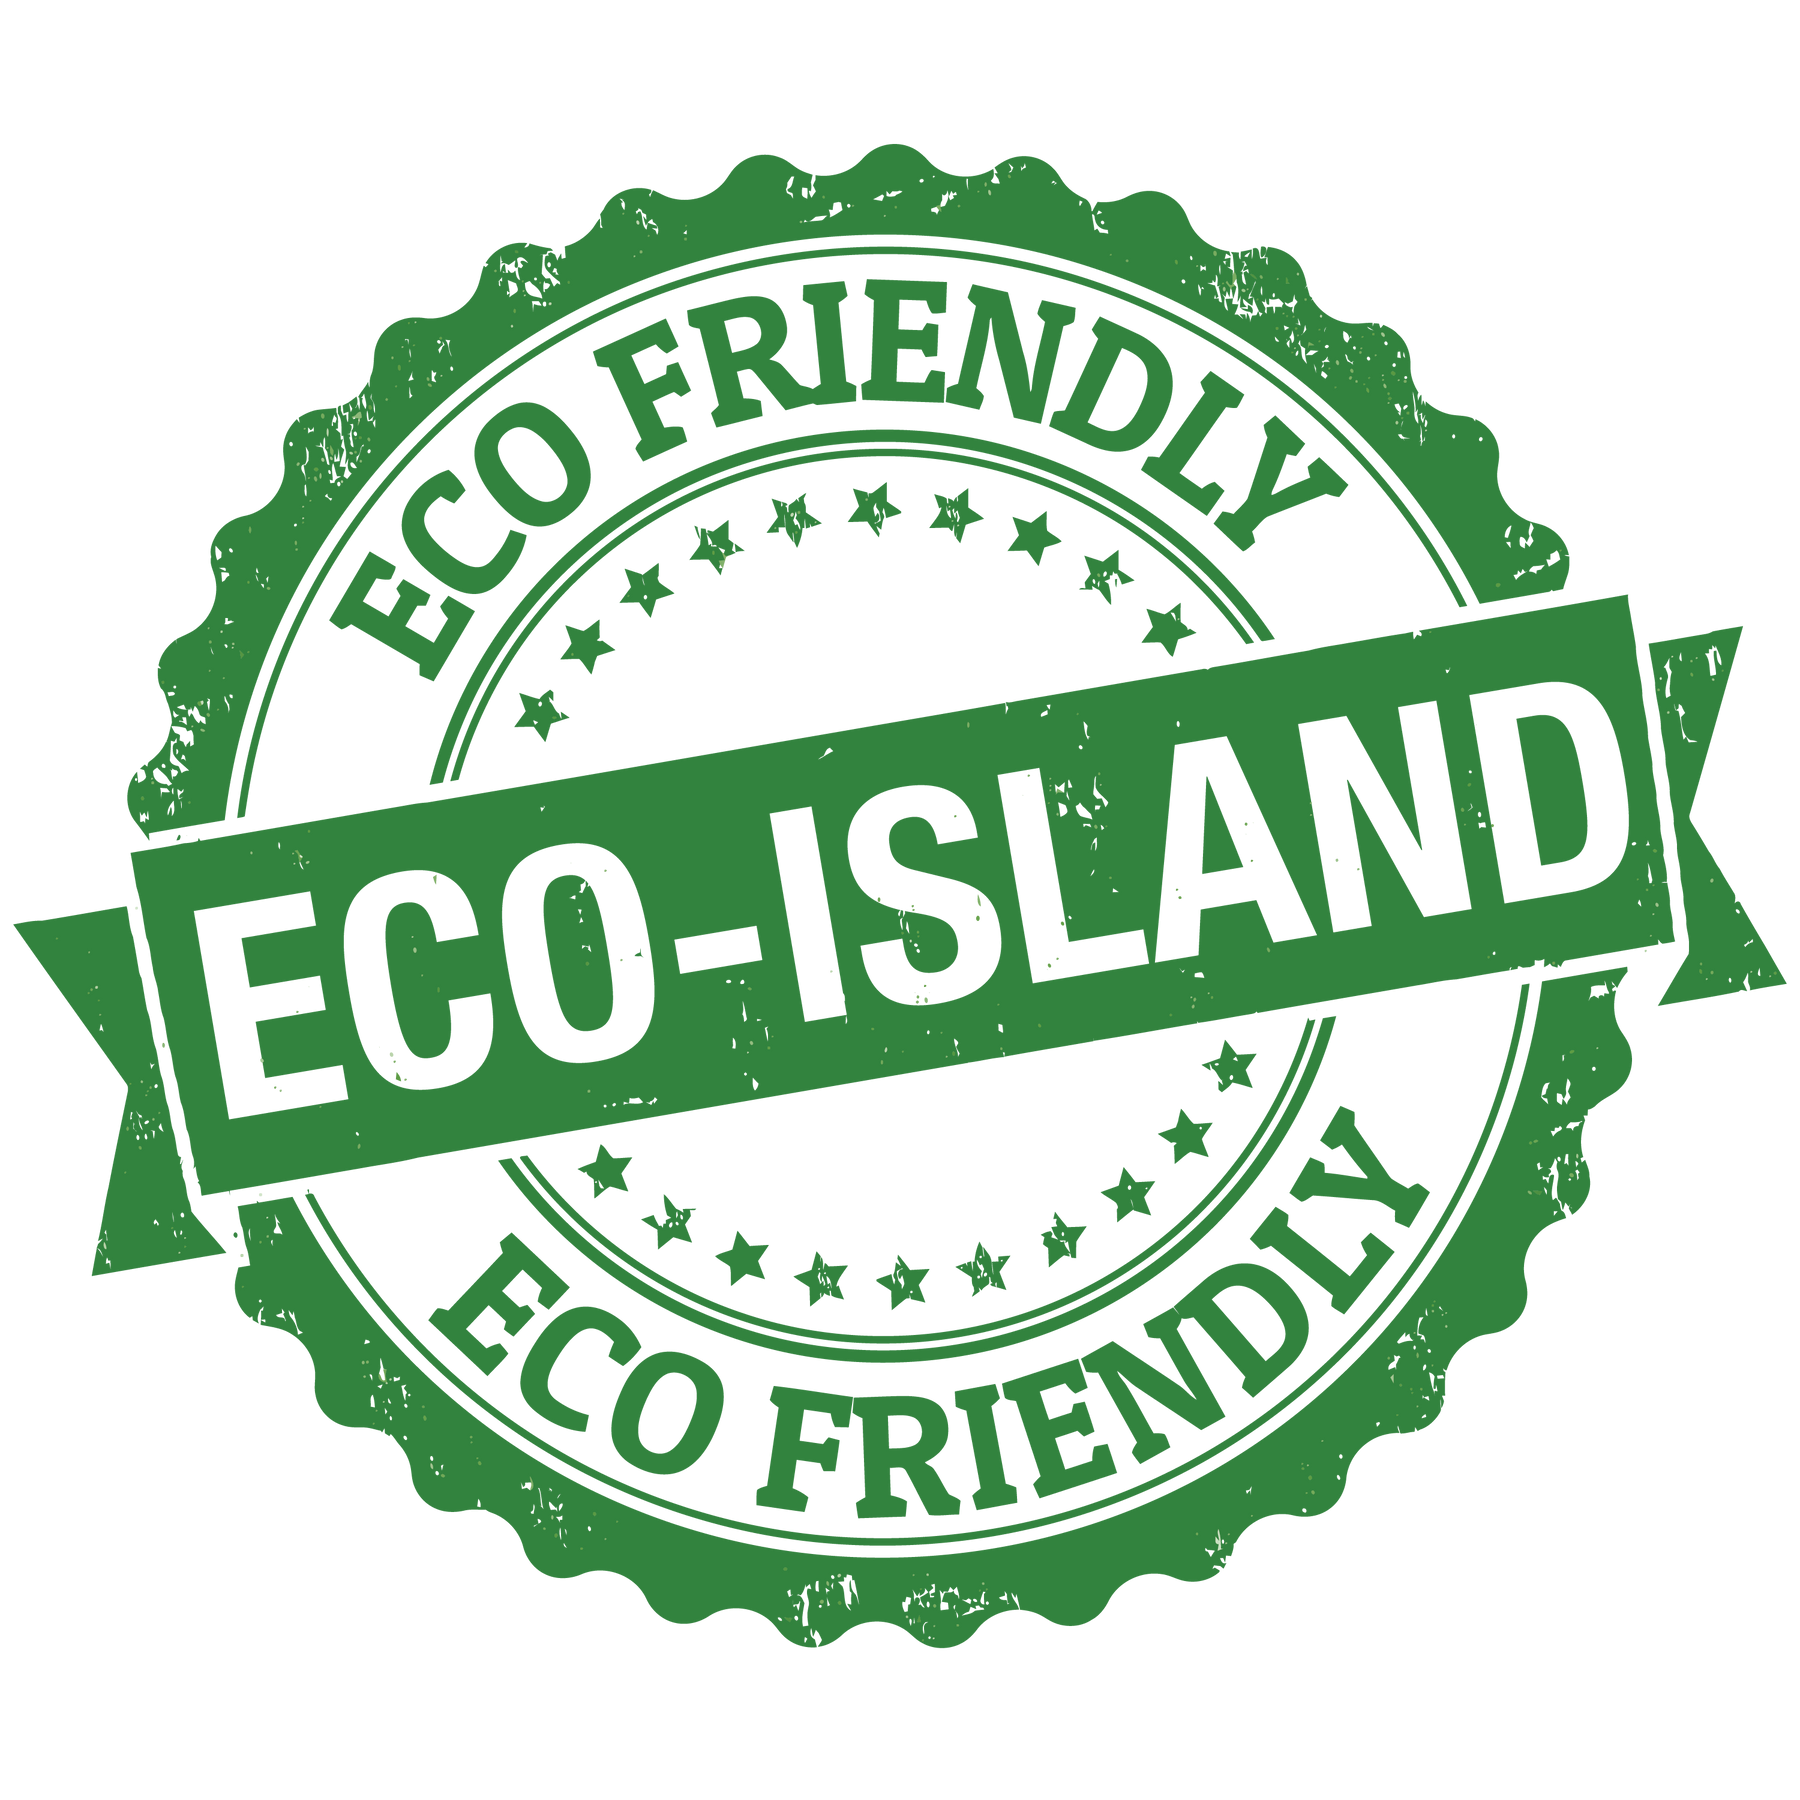 ABOUT: Eco- Island